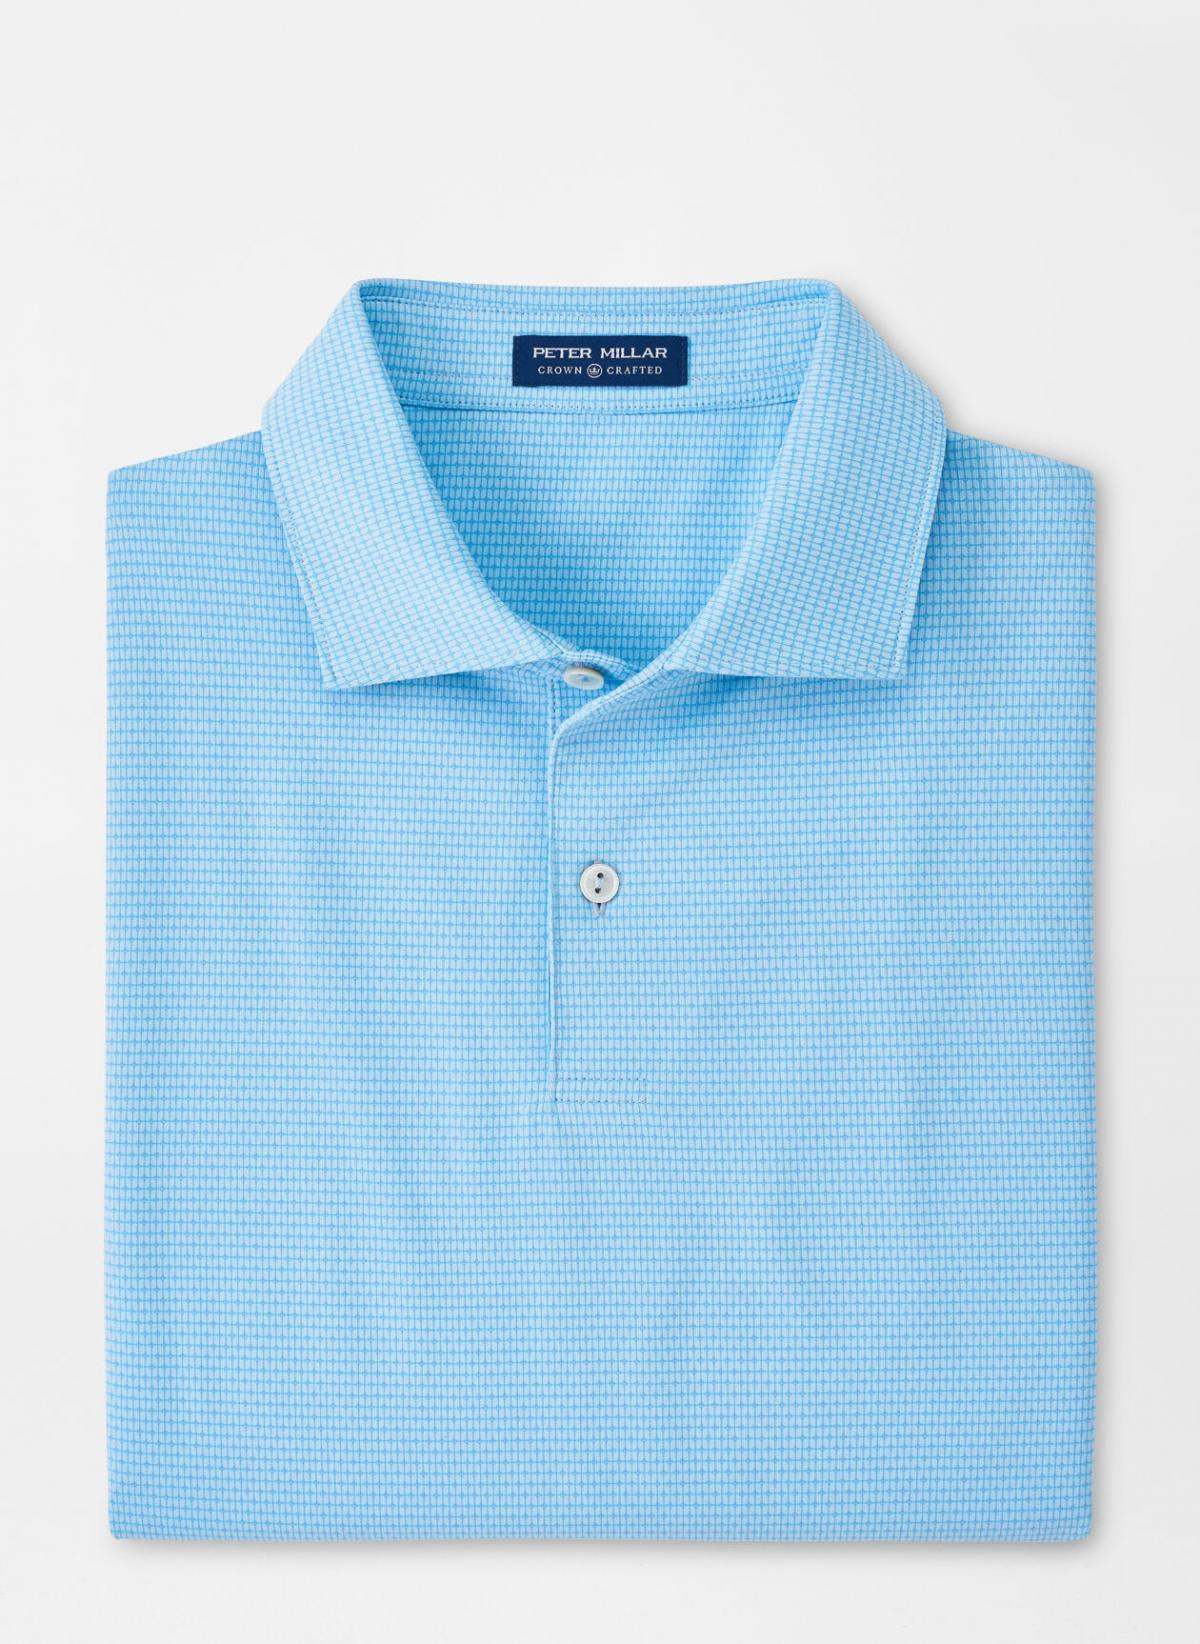 QUINTET PERFORMANCE JERSEY POLO